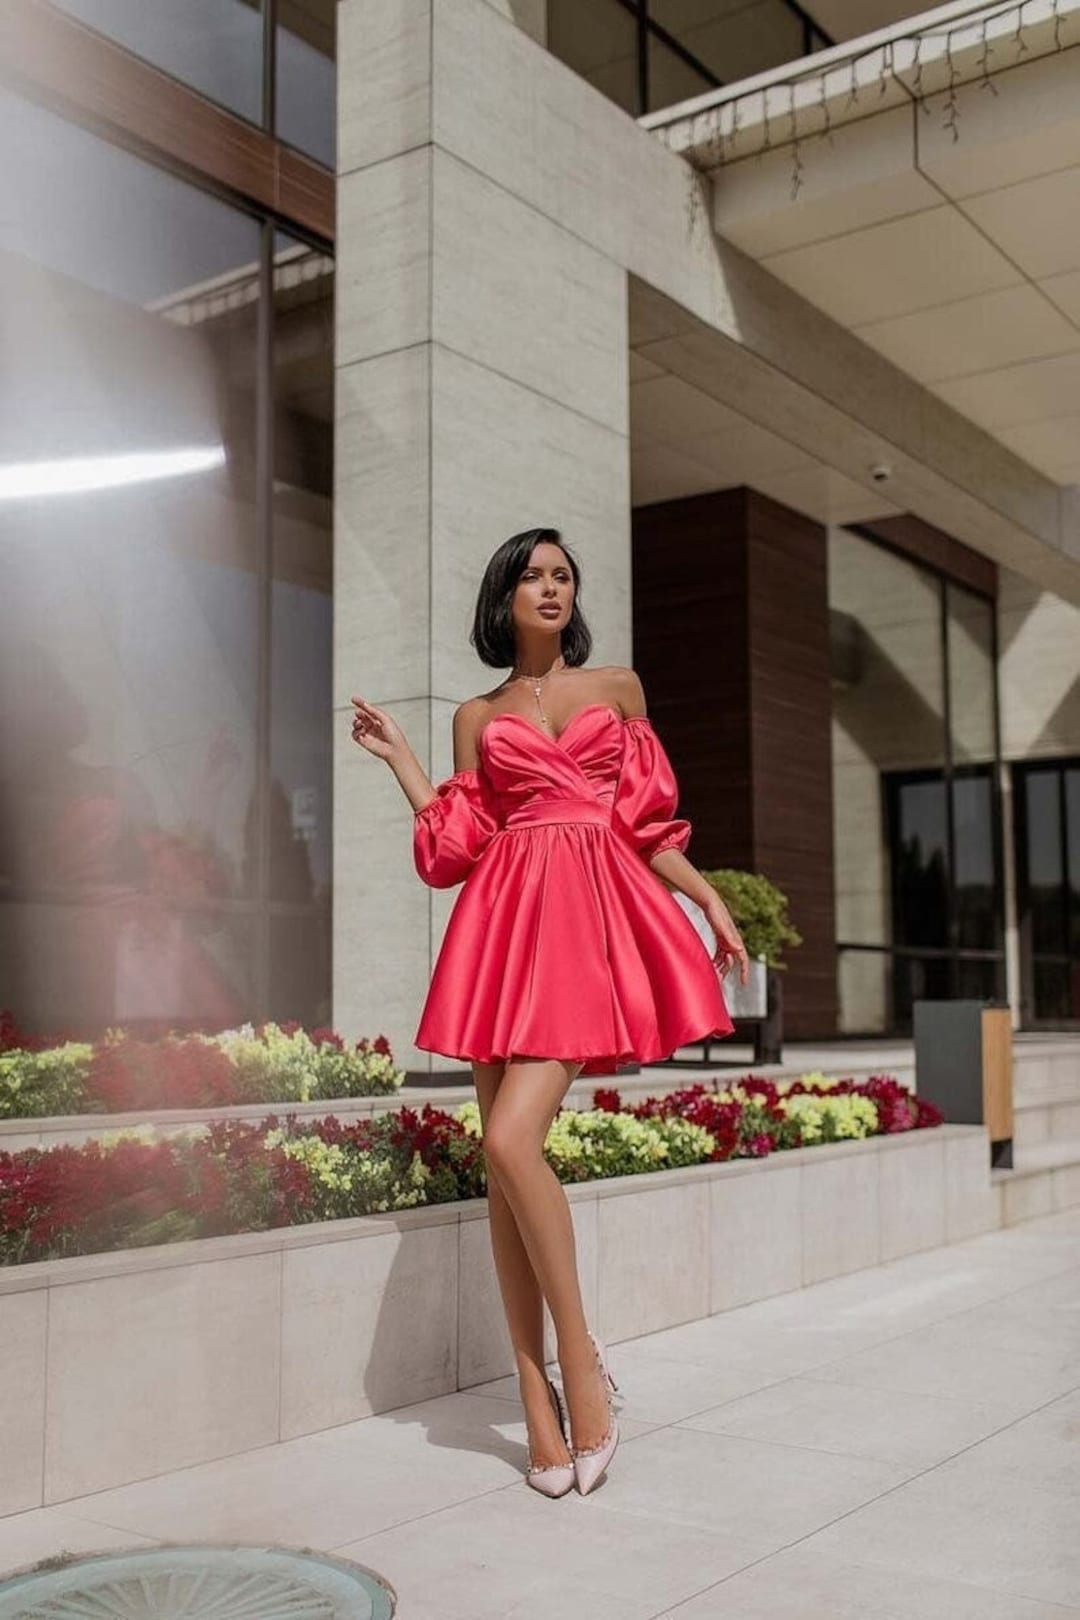 Red Satin Dress, Red Flared Dress, Short Flowy Dress, Red Swing